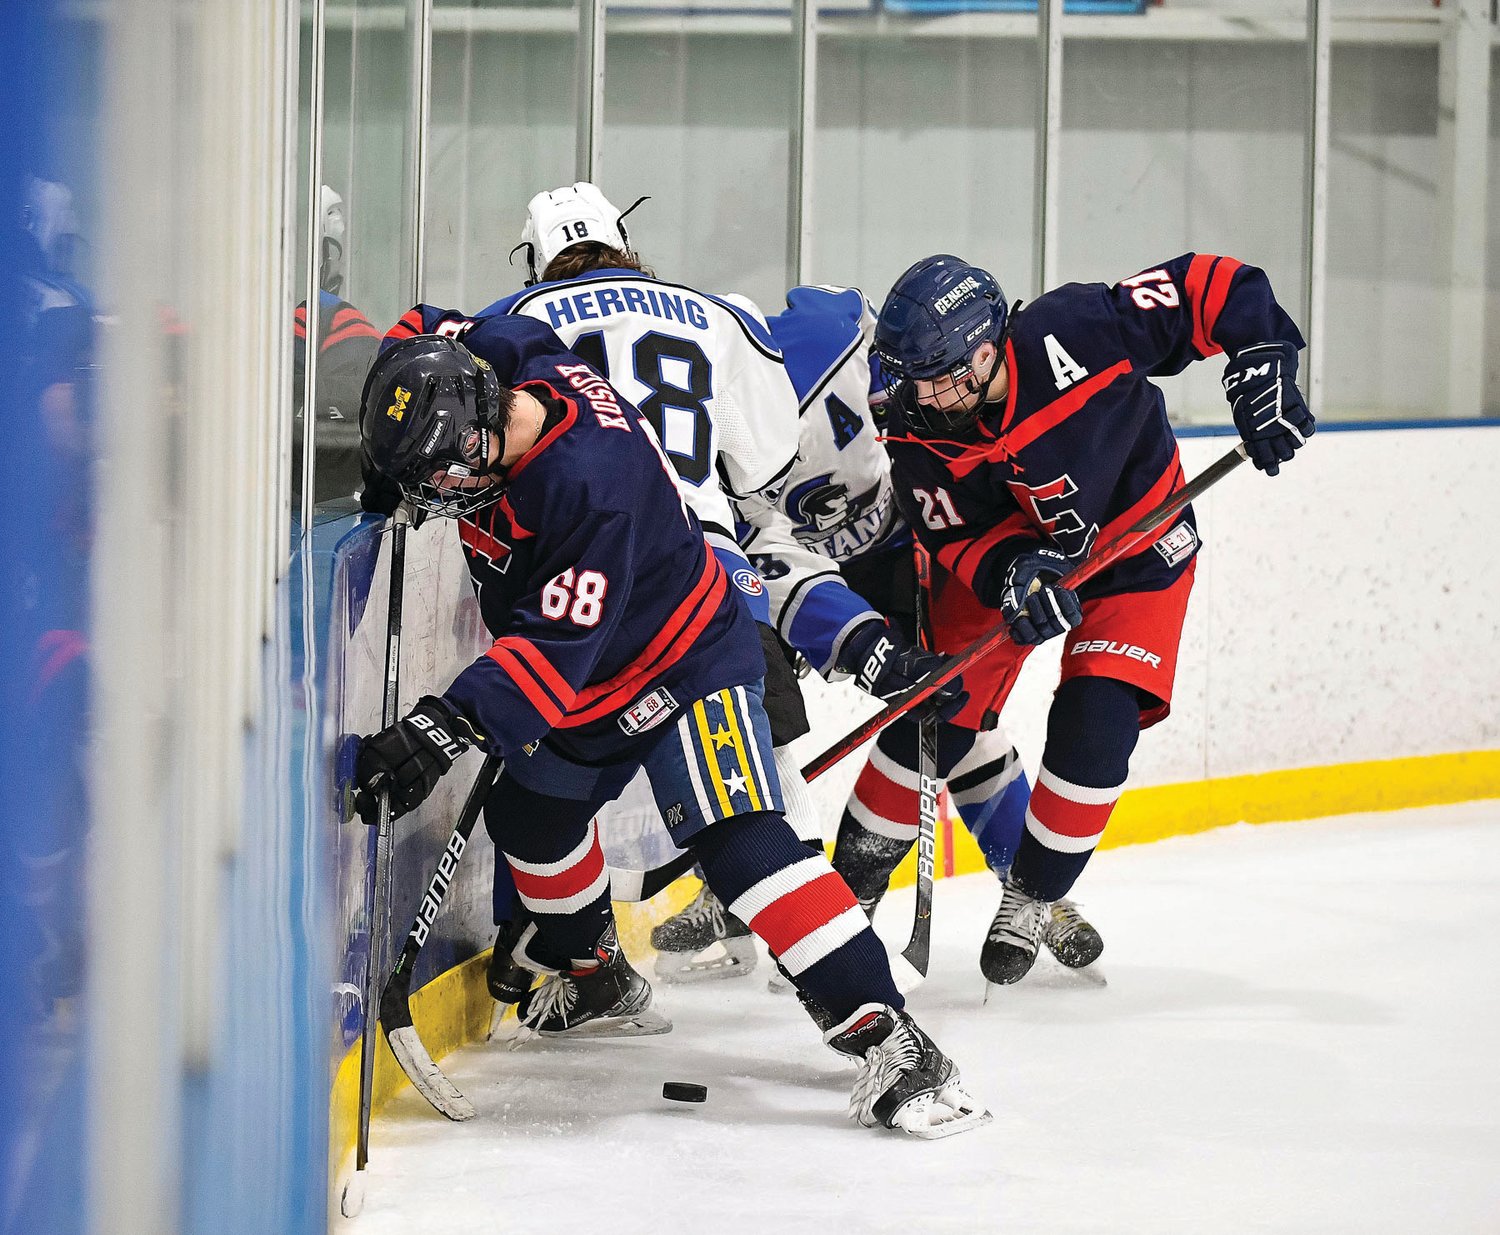 CB East’s Bogdan Borodenko digs the puck out of corner during a scrum in the CB South corner.